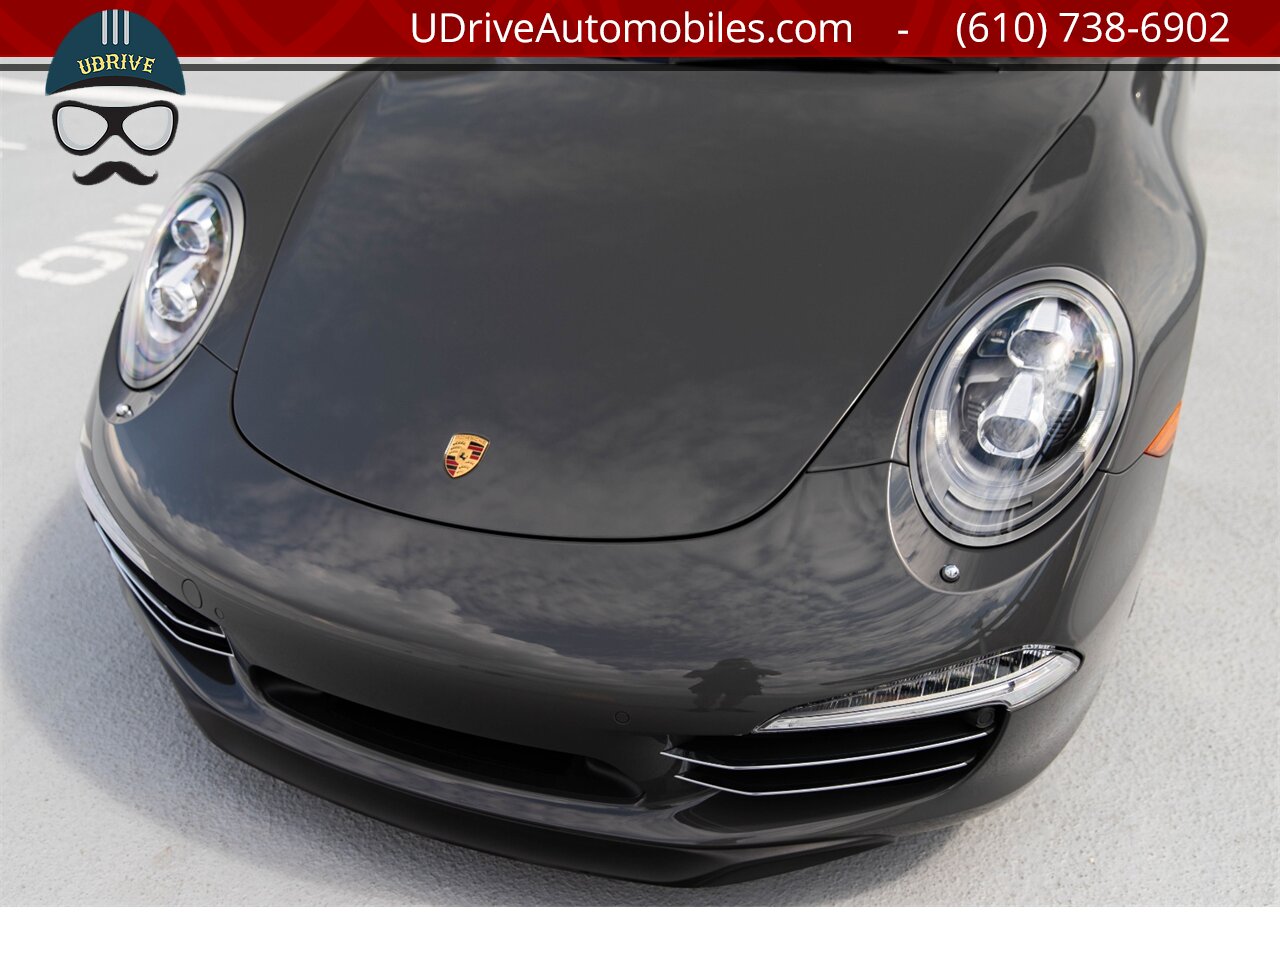 2014 Porsche 911 Carrera S 50th Anniversary Edition Certified  CPO Warranty thru 12/26/21 Full Front End Clear Film - Photo 9 - West Chester, PA 19382